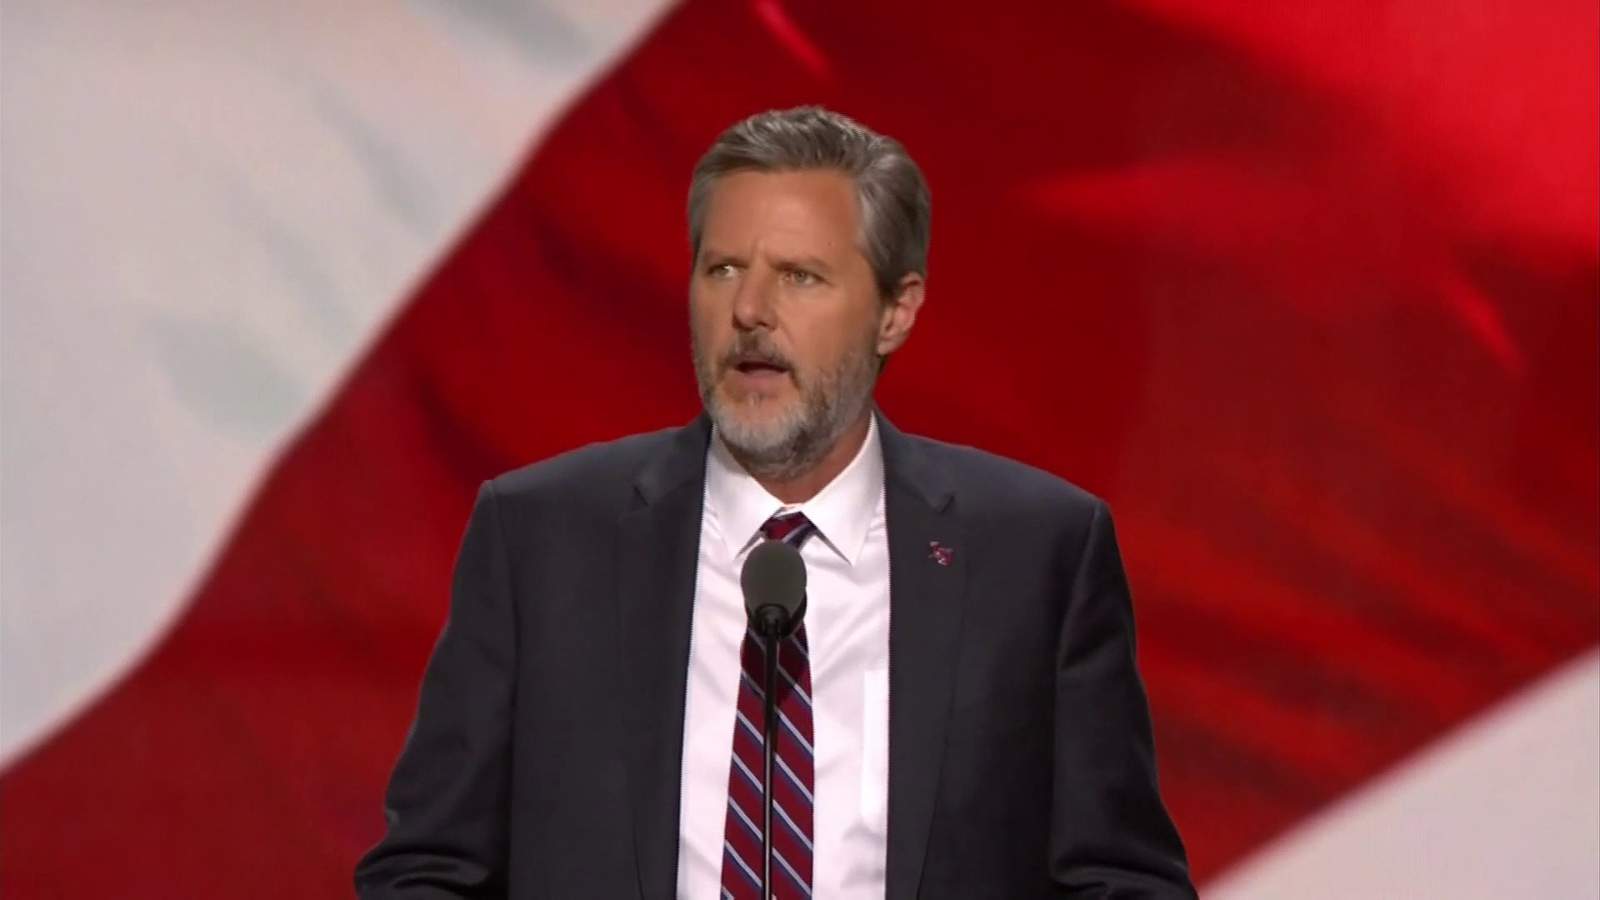 Former Liberty University president Jerry Falwell Jr. issues several tweets in response to lawsuit